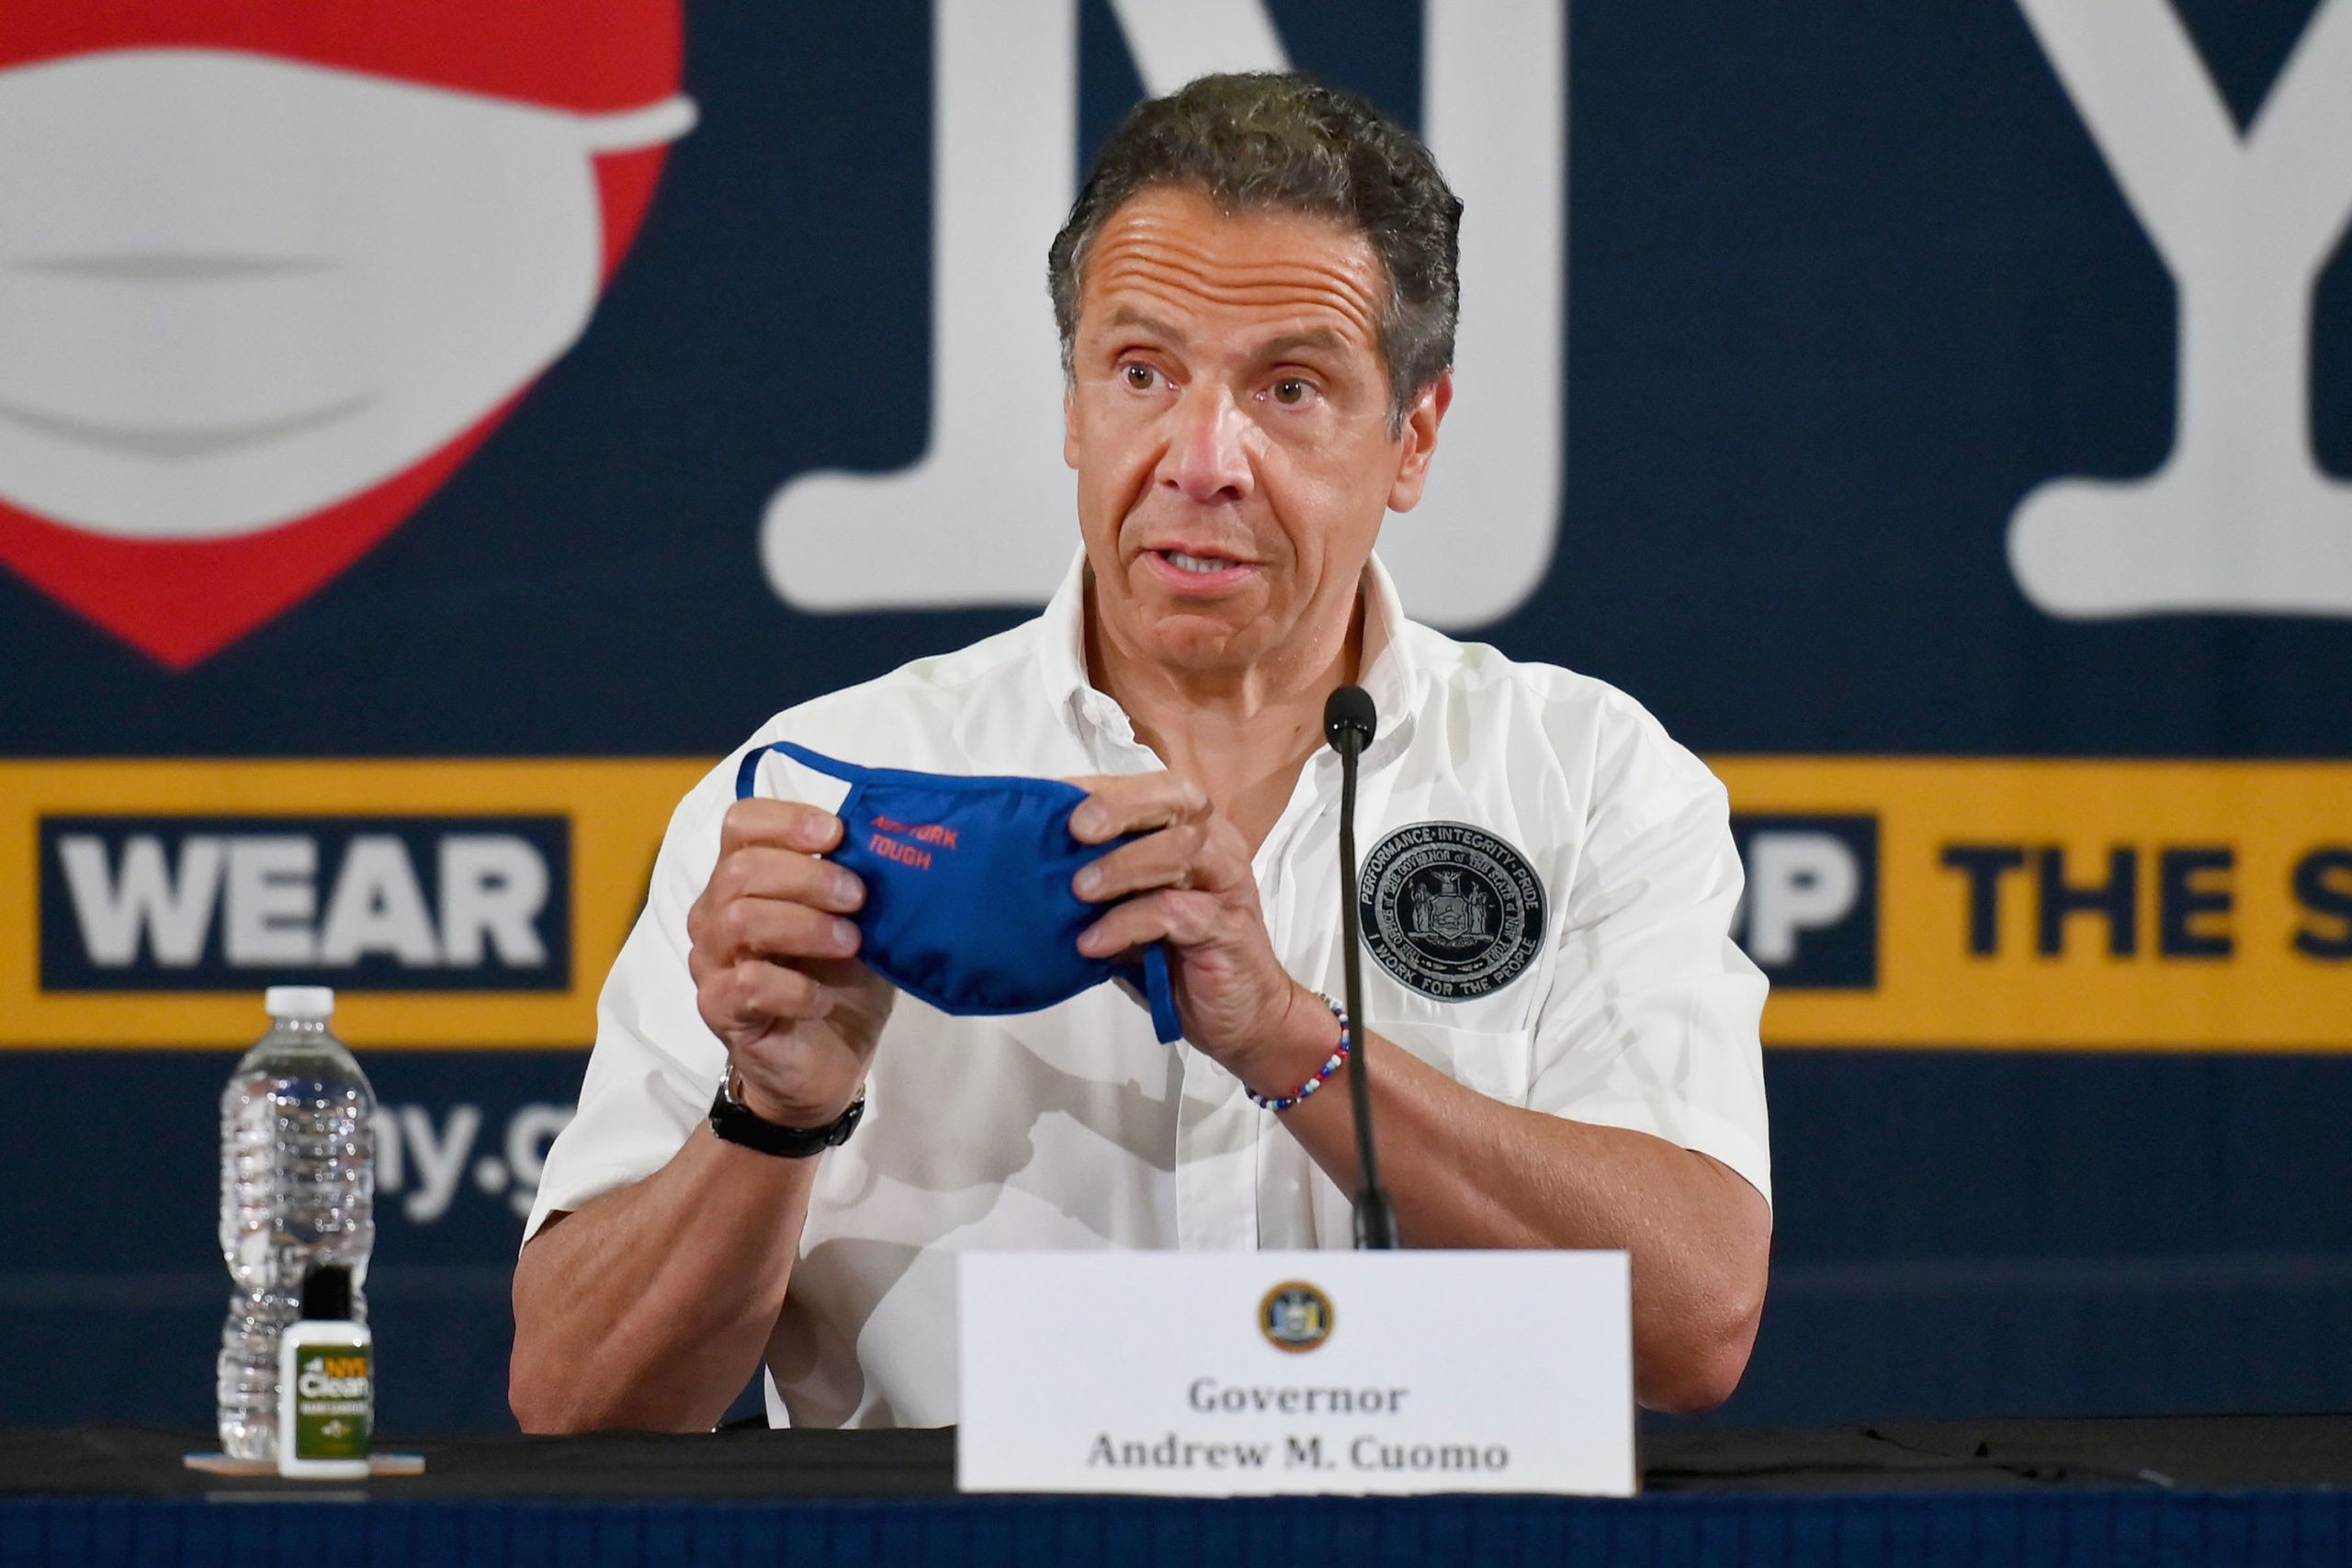 NY Gov. Cuomo factors to a spike in coronavirus circumstances in Florida as he urges warning in reopening